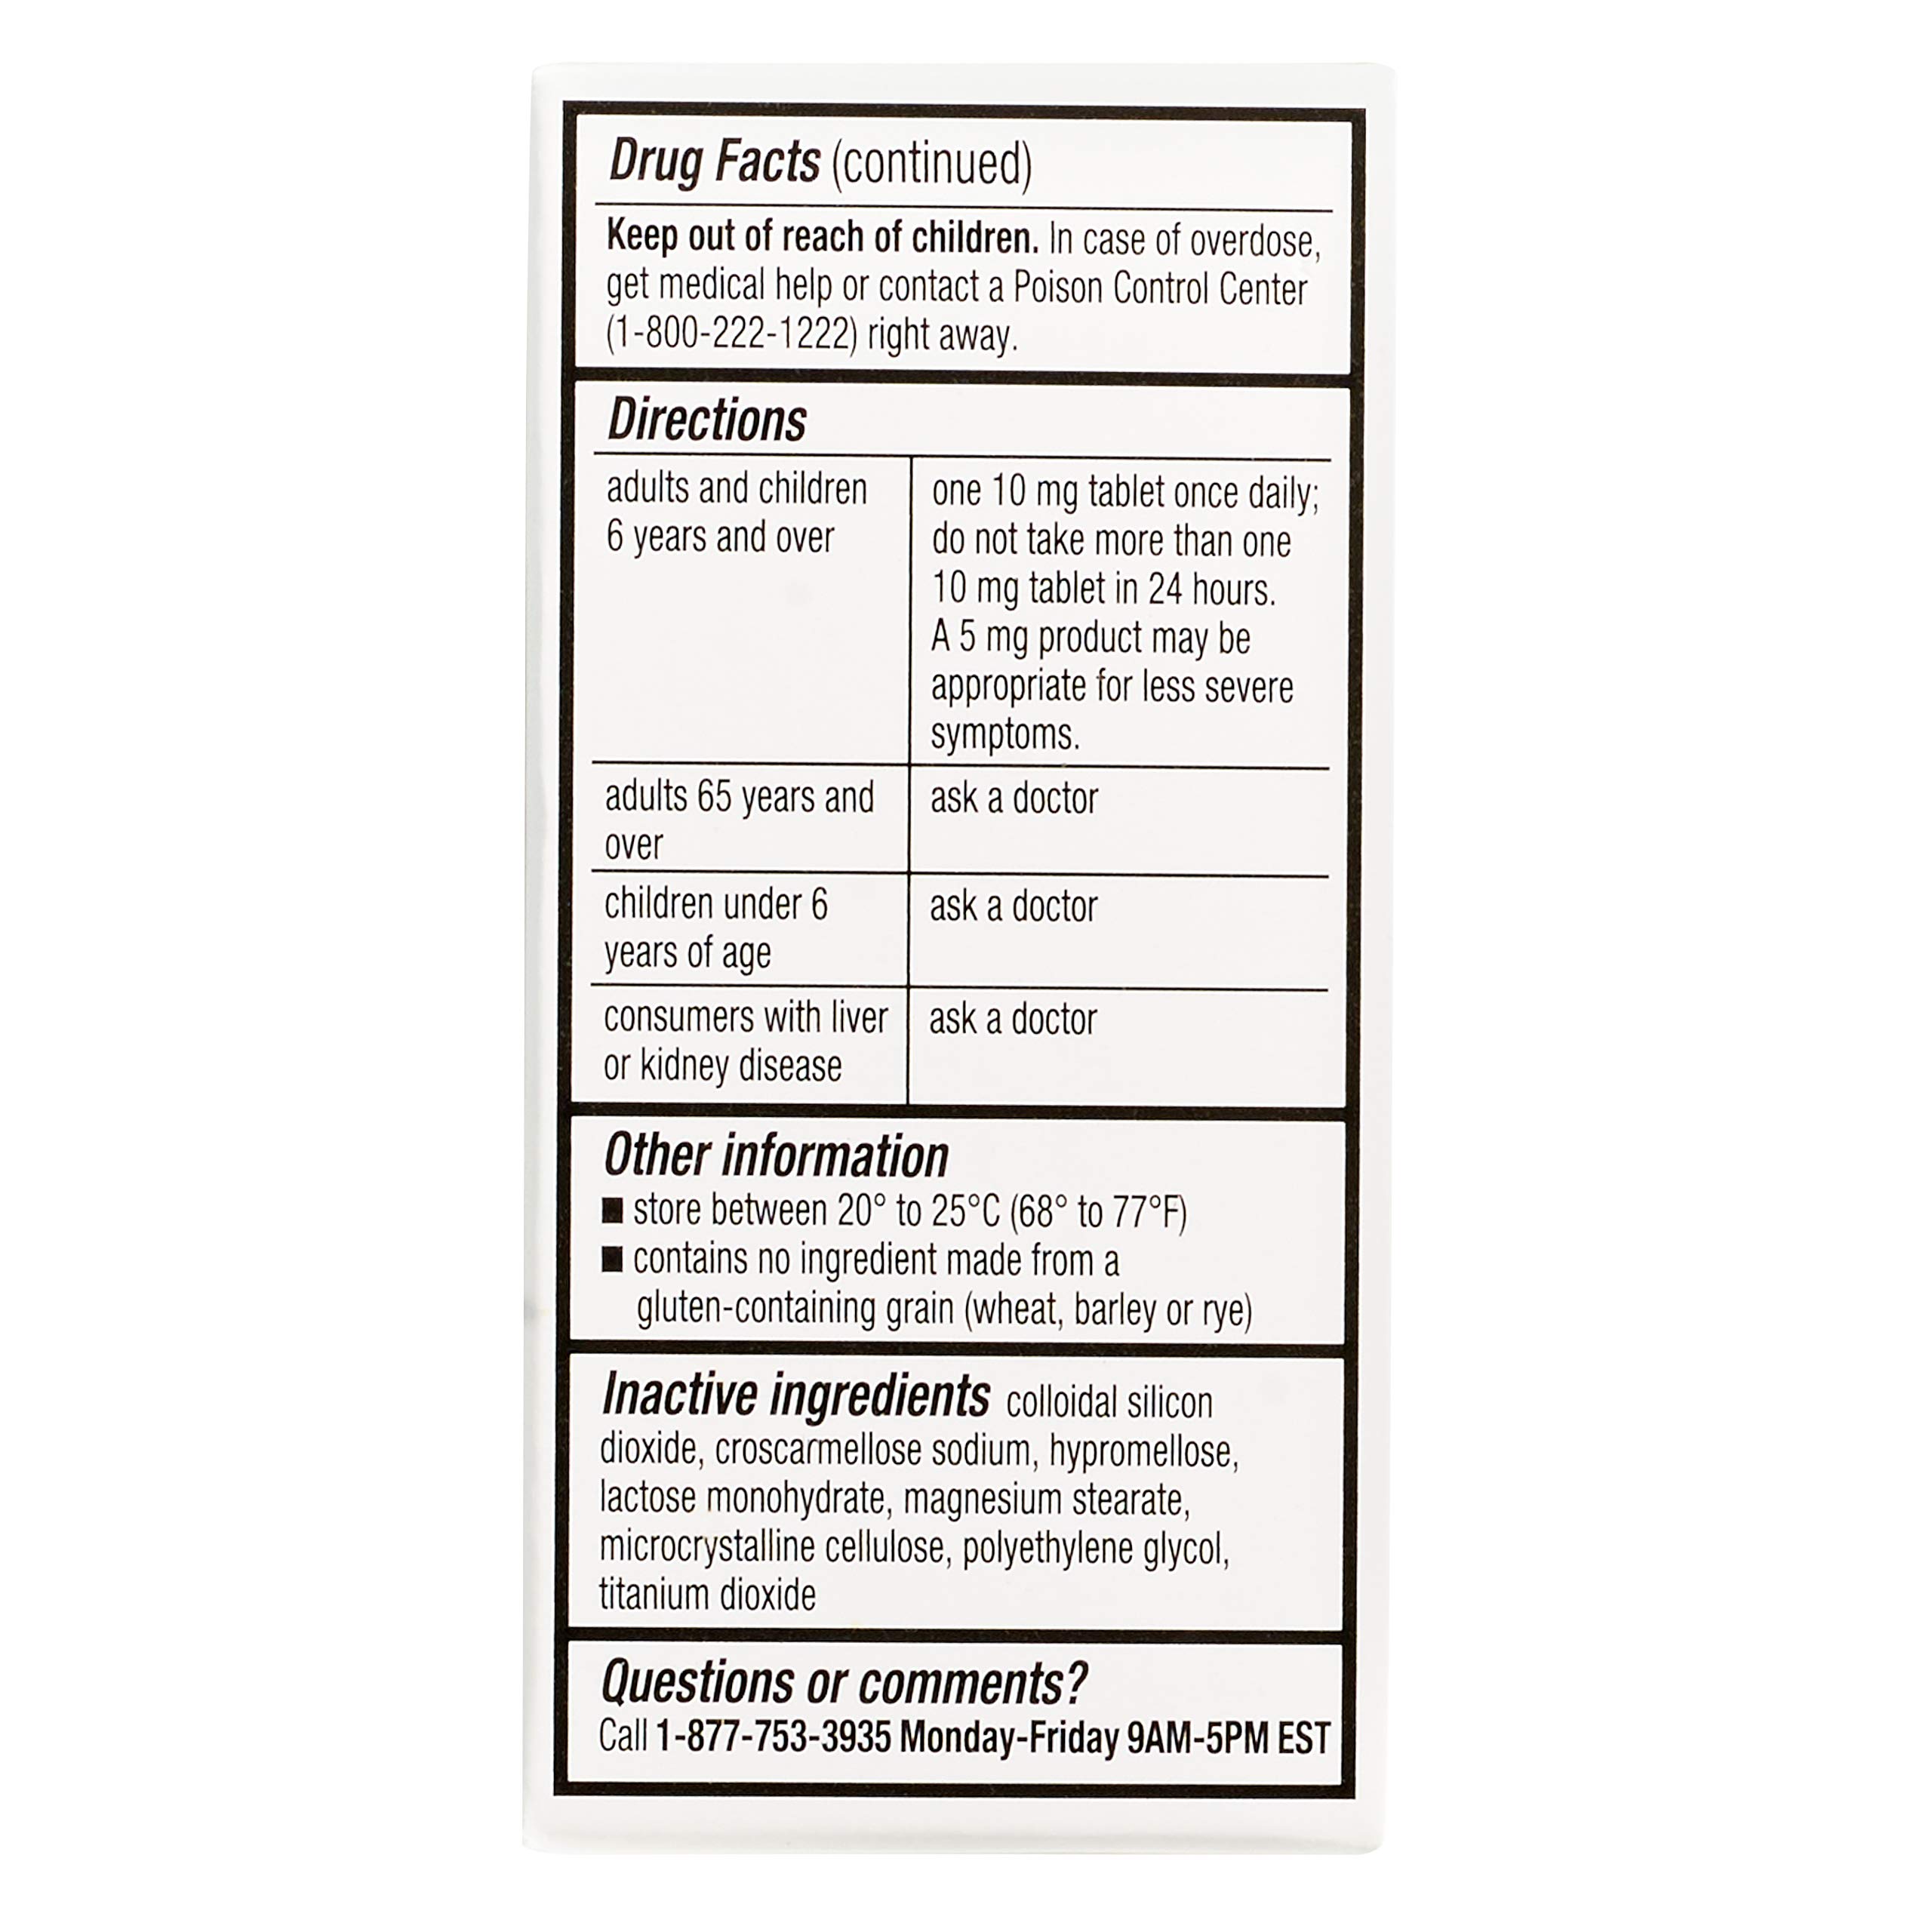 Rite Aid 24 Hour Allergy Relief with Cetirizine HCI Tablets, 10 mg - 120 Count | Allergy Medicine for Indoor & Outdoor Allergies